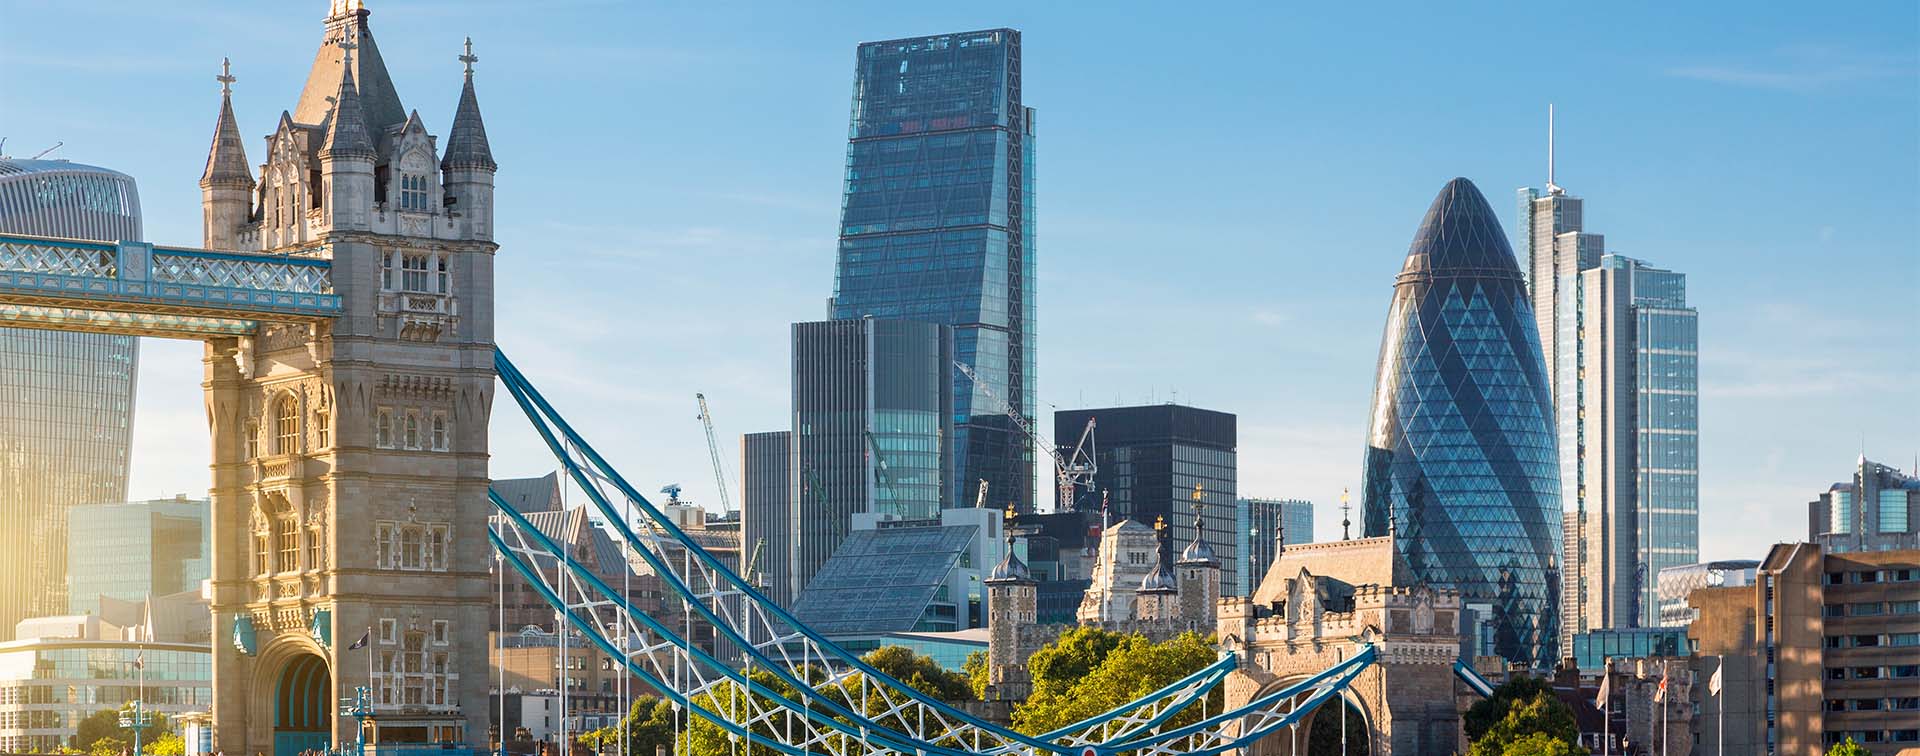 City of London featuring Tower Bridge and several iconic buildings including The Gherkin, Heron Tower, the Leadenhall Building